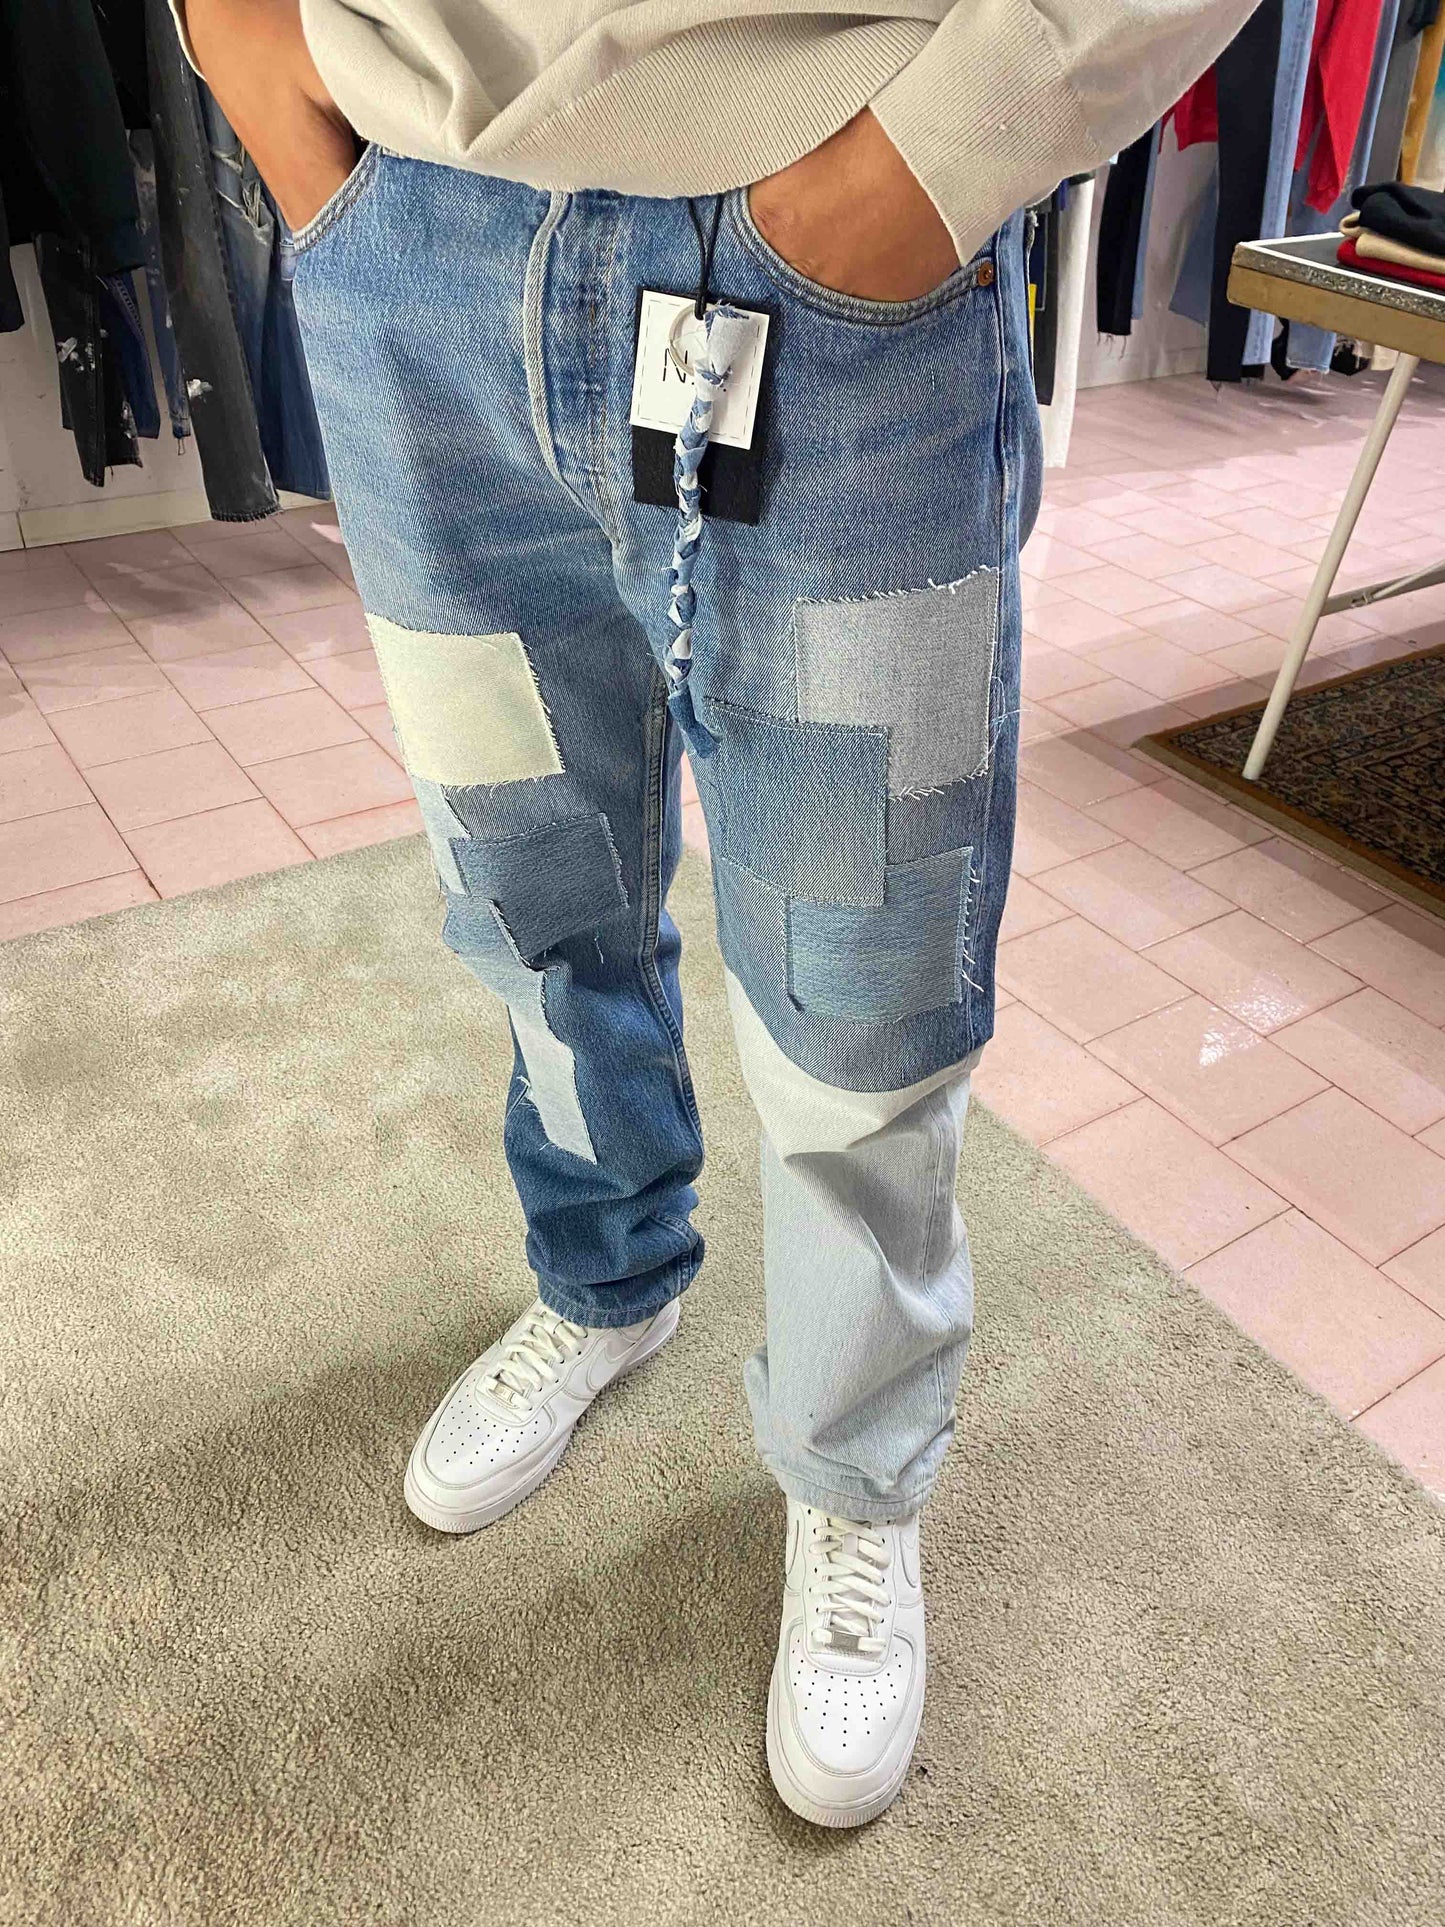 SEMI-PATCHED JEANS V1